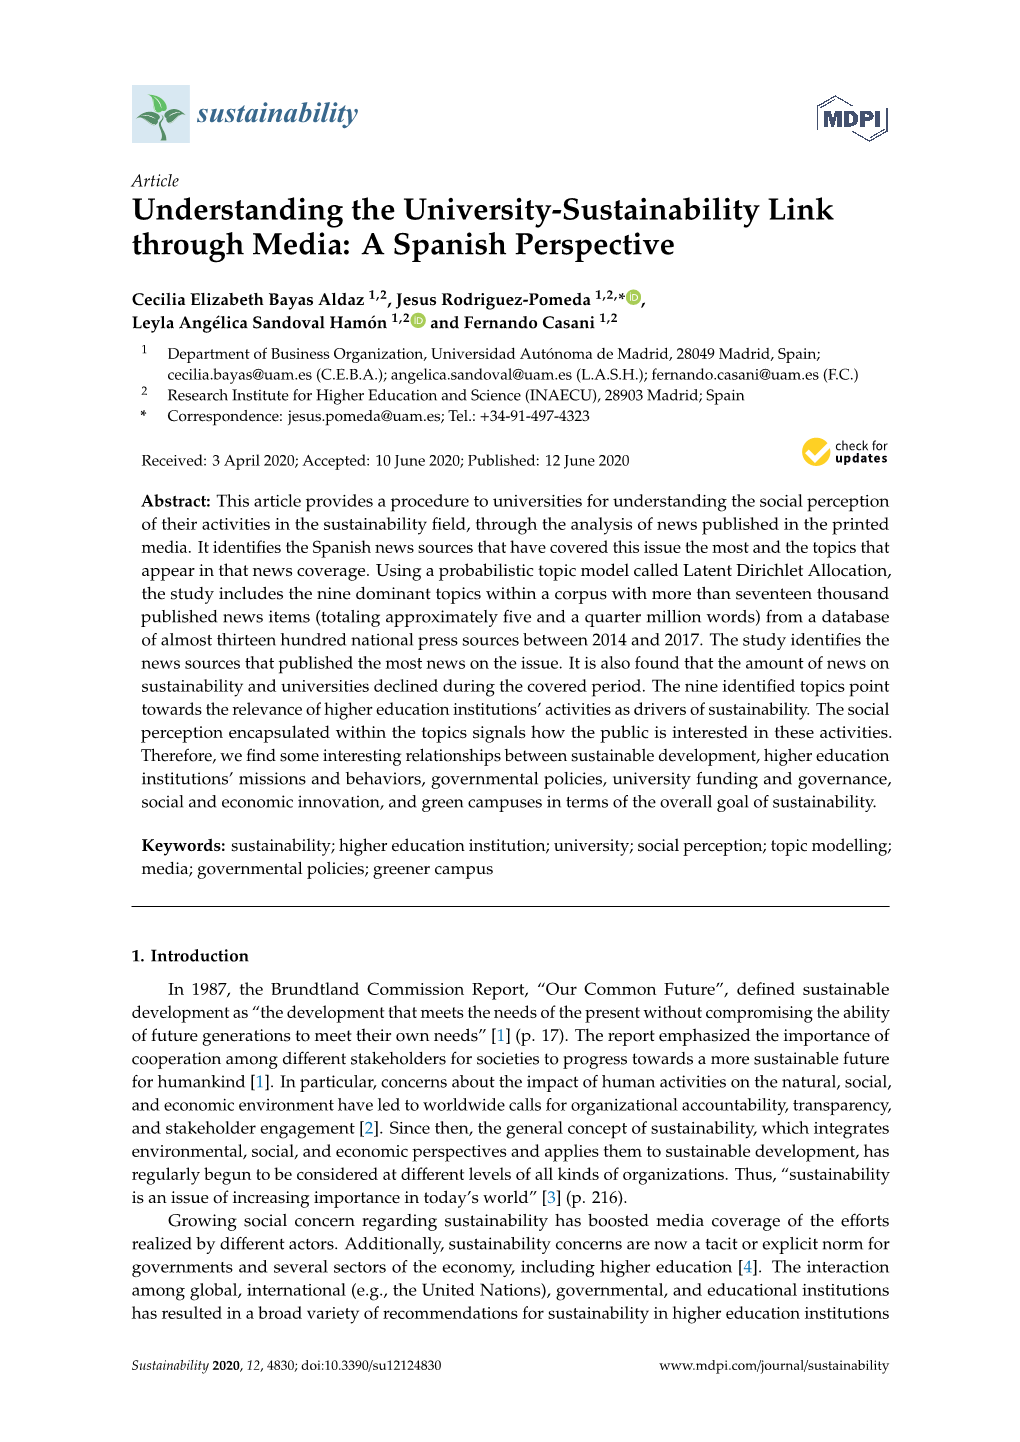 Understanding the University-Sustainability Link Through Media: a Spanish Perspective